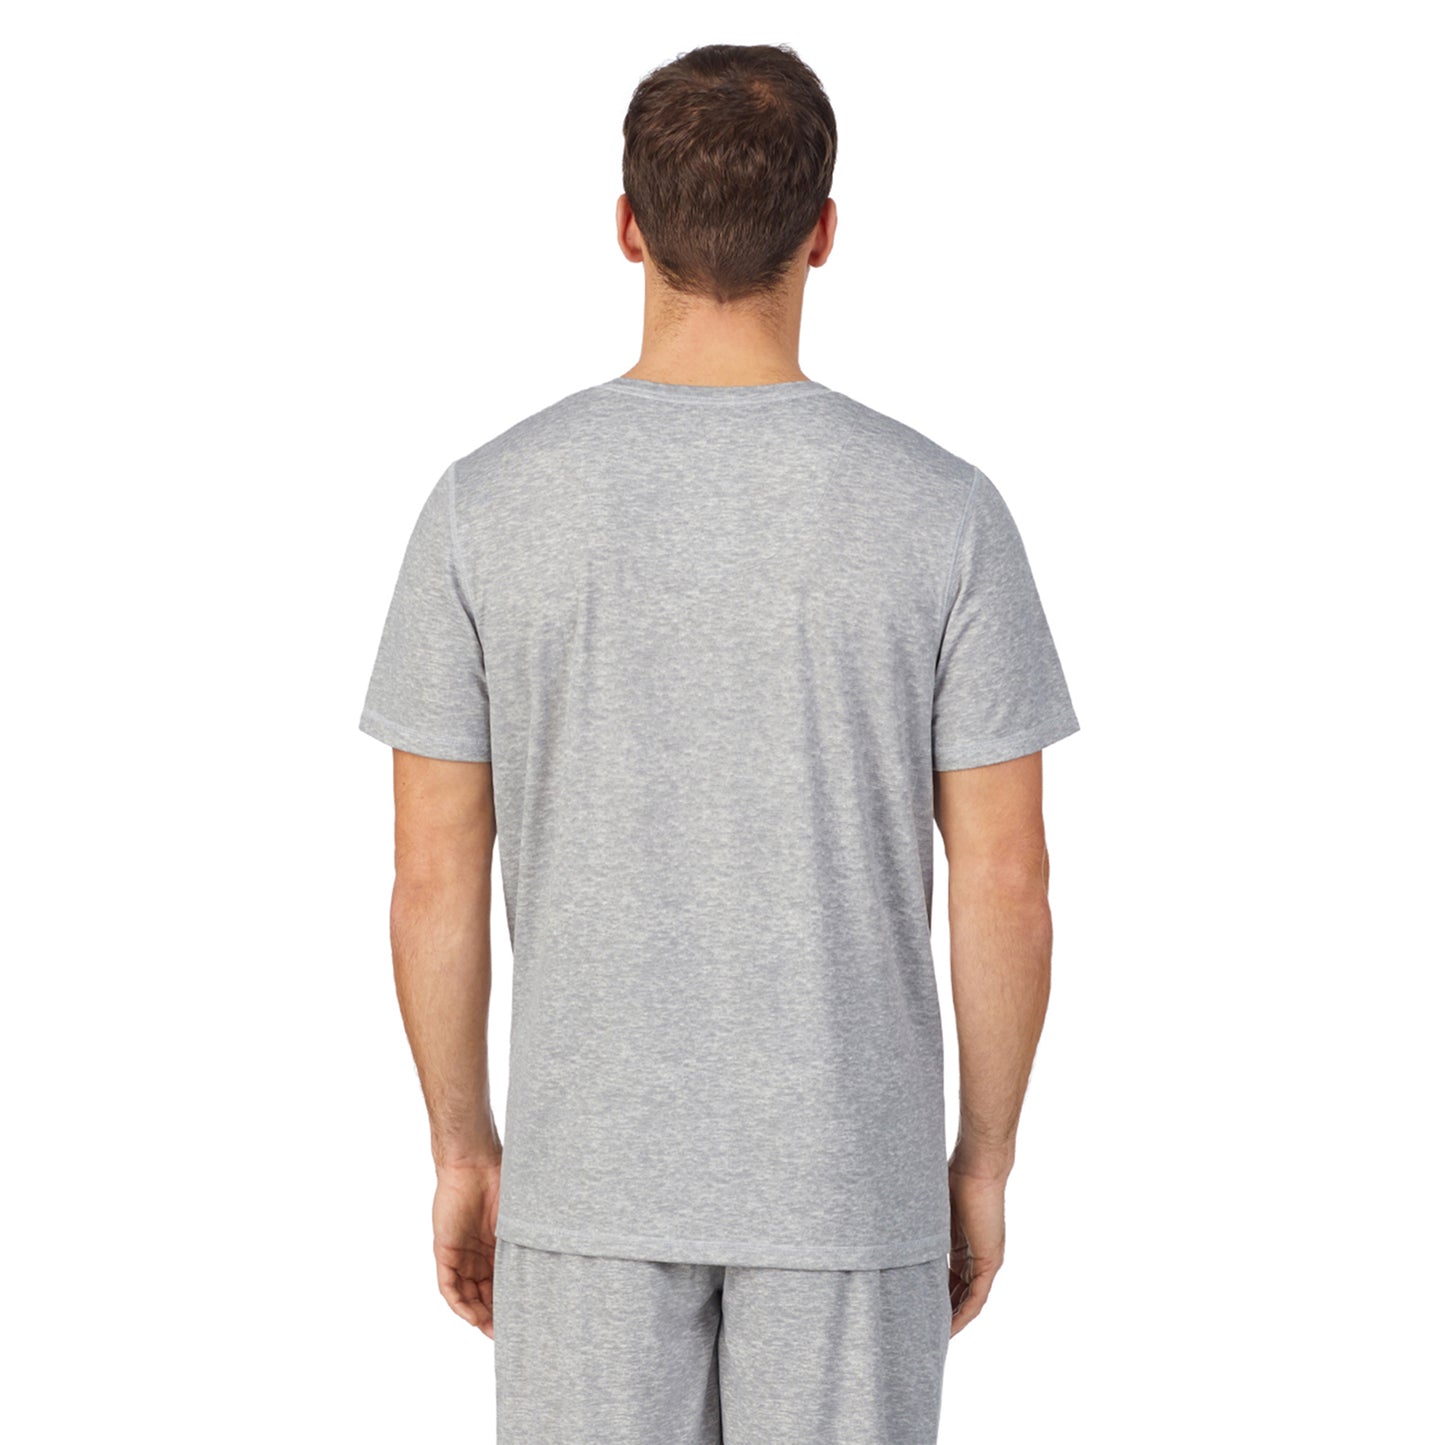 Grey Heather;Model is wearing size M. He is 6'1", Waist 31", Inseam 33"@ A lady wearingMens Far-Infrared Enhance Sleep Short Sleeve V-Neck Top with Grey Heather print